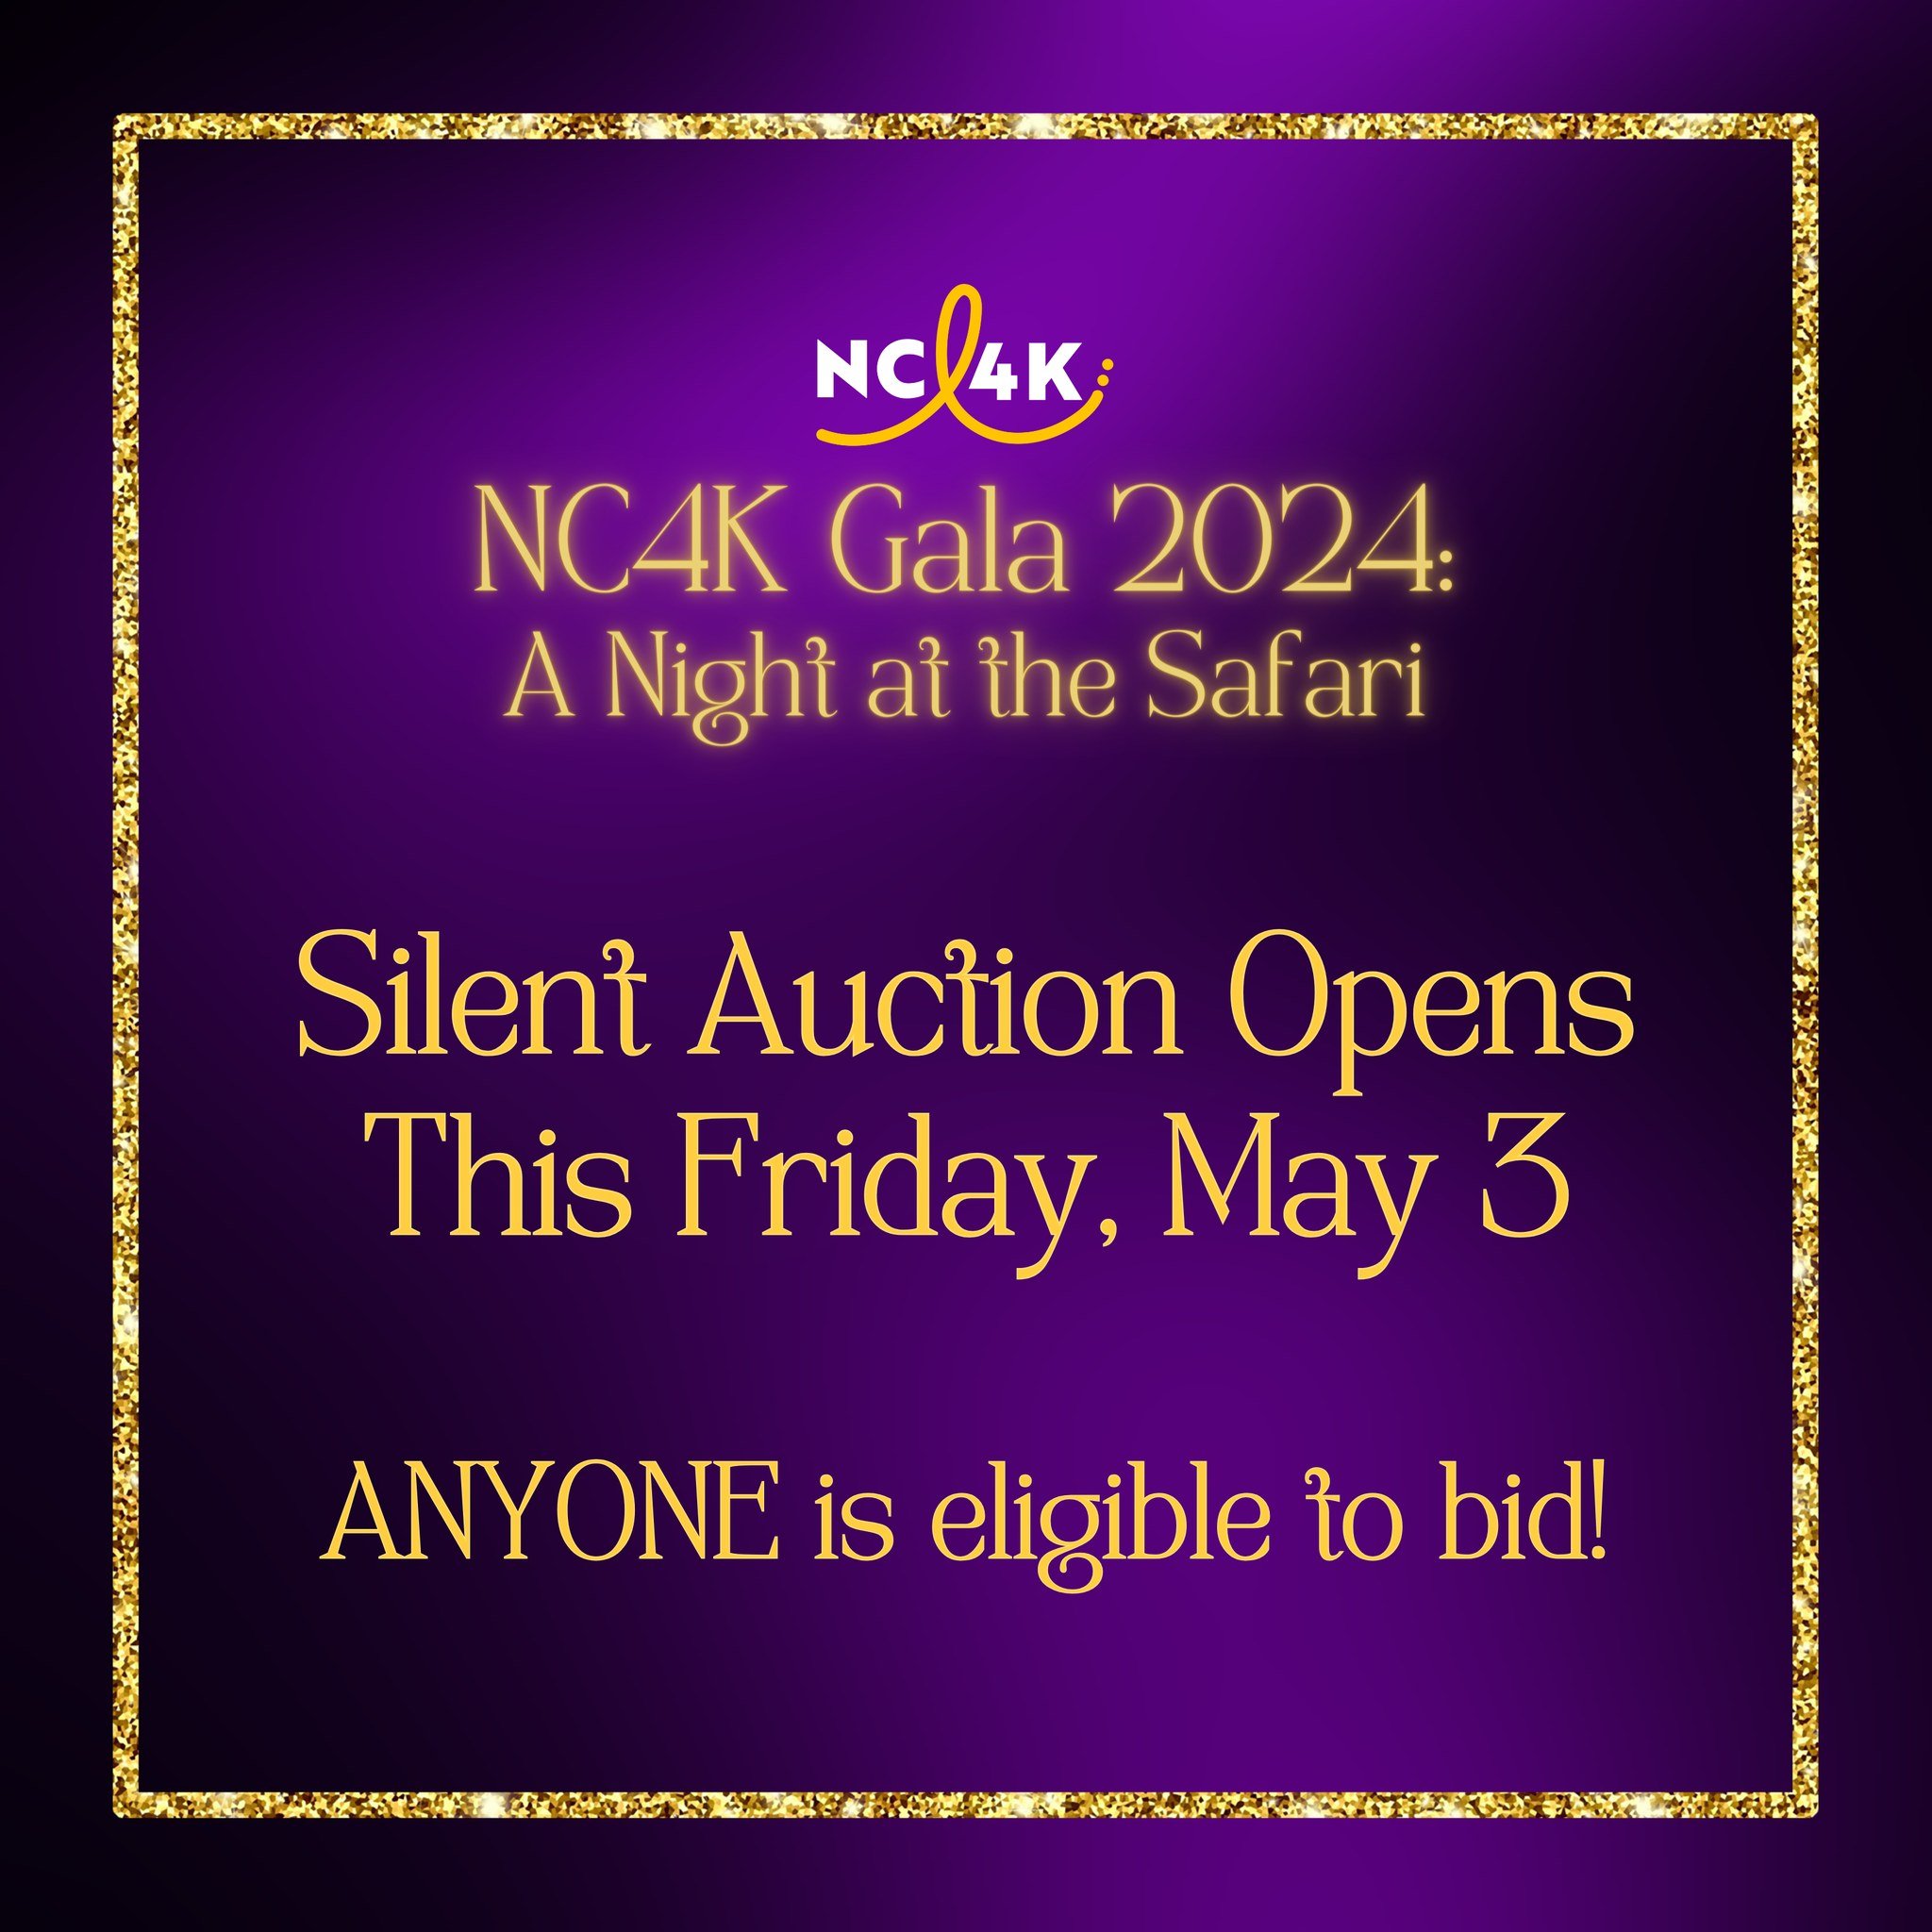 Our 2024 Gala Silent Auction opens up this Friday! You don't have to be a Gala guest to participate&mdash; everyone is welcome to bid on the incredible assortment of prizes and packages we have available this year. To join our silent auction, make an